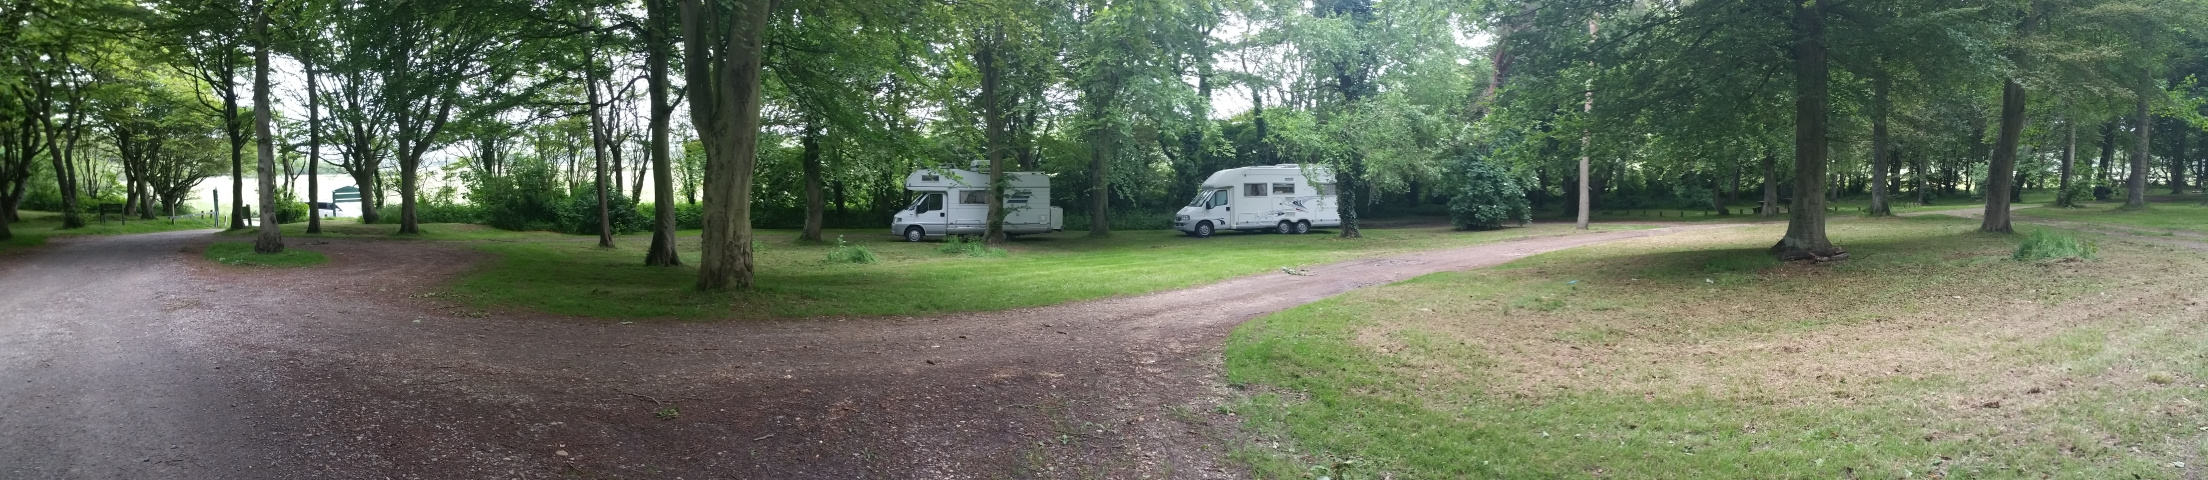  Park and overnight place Litlington Road.